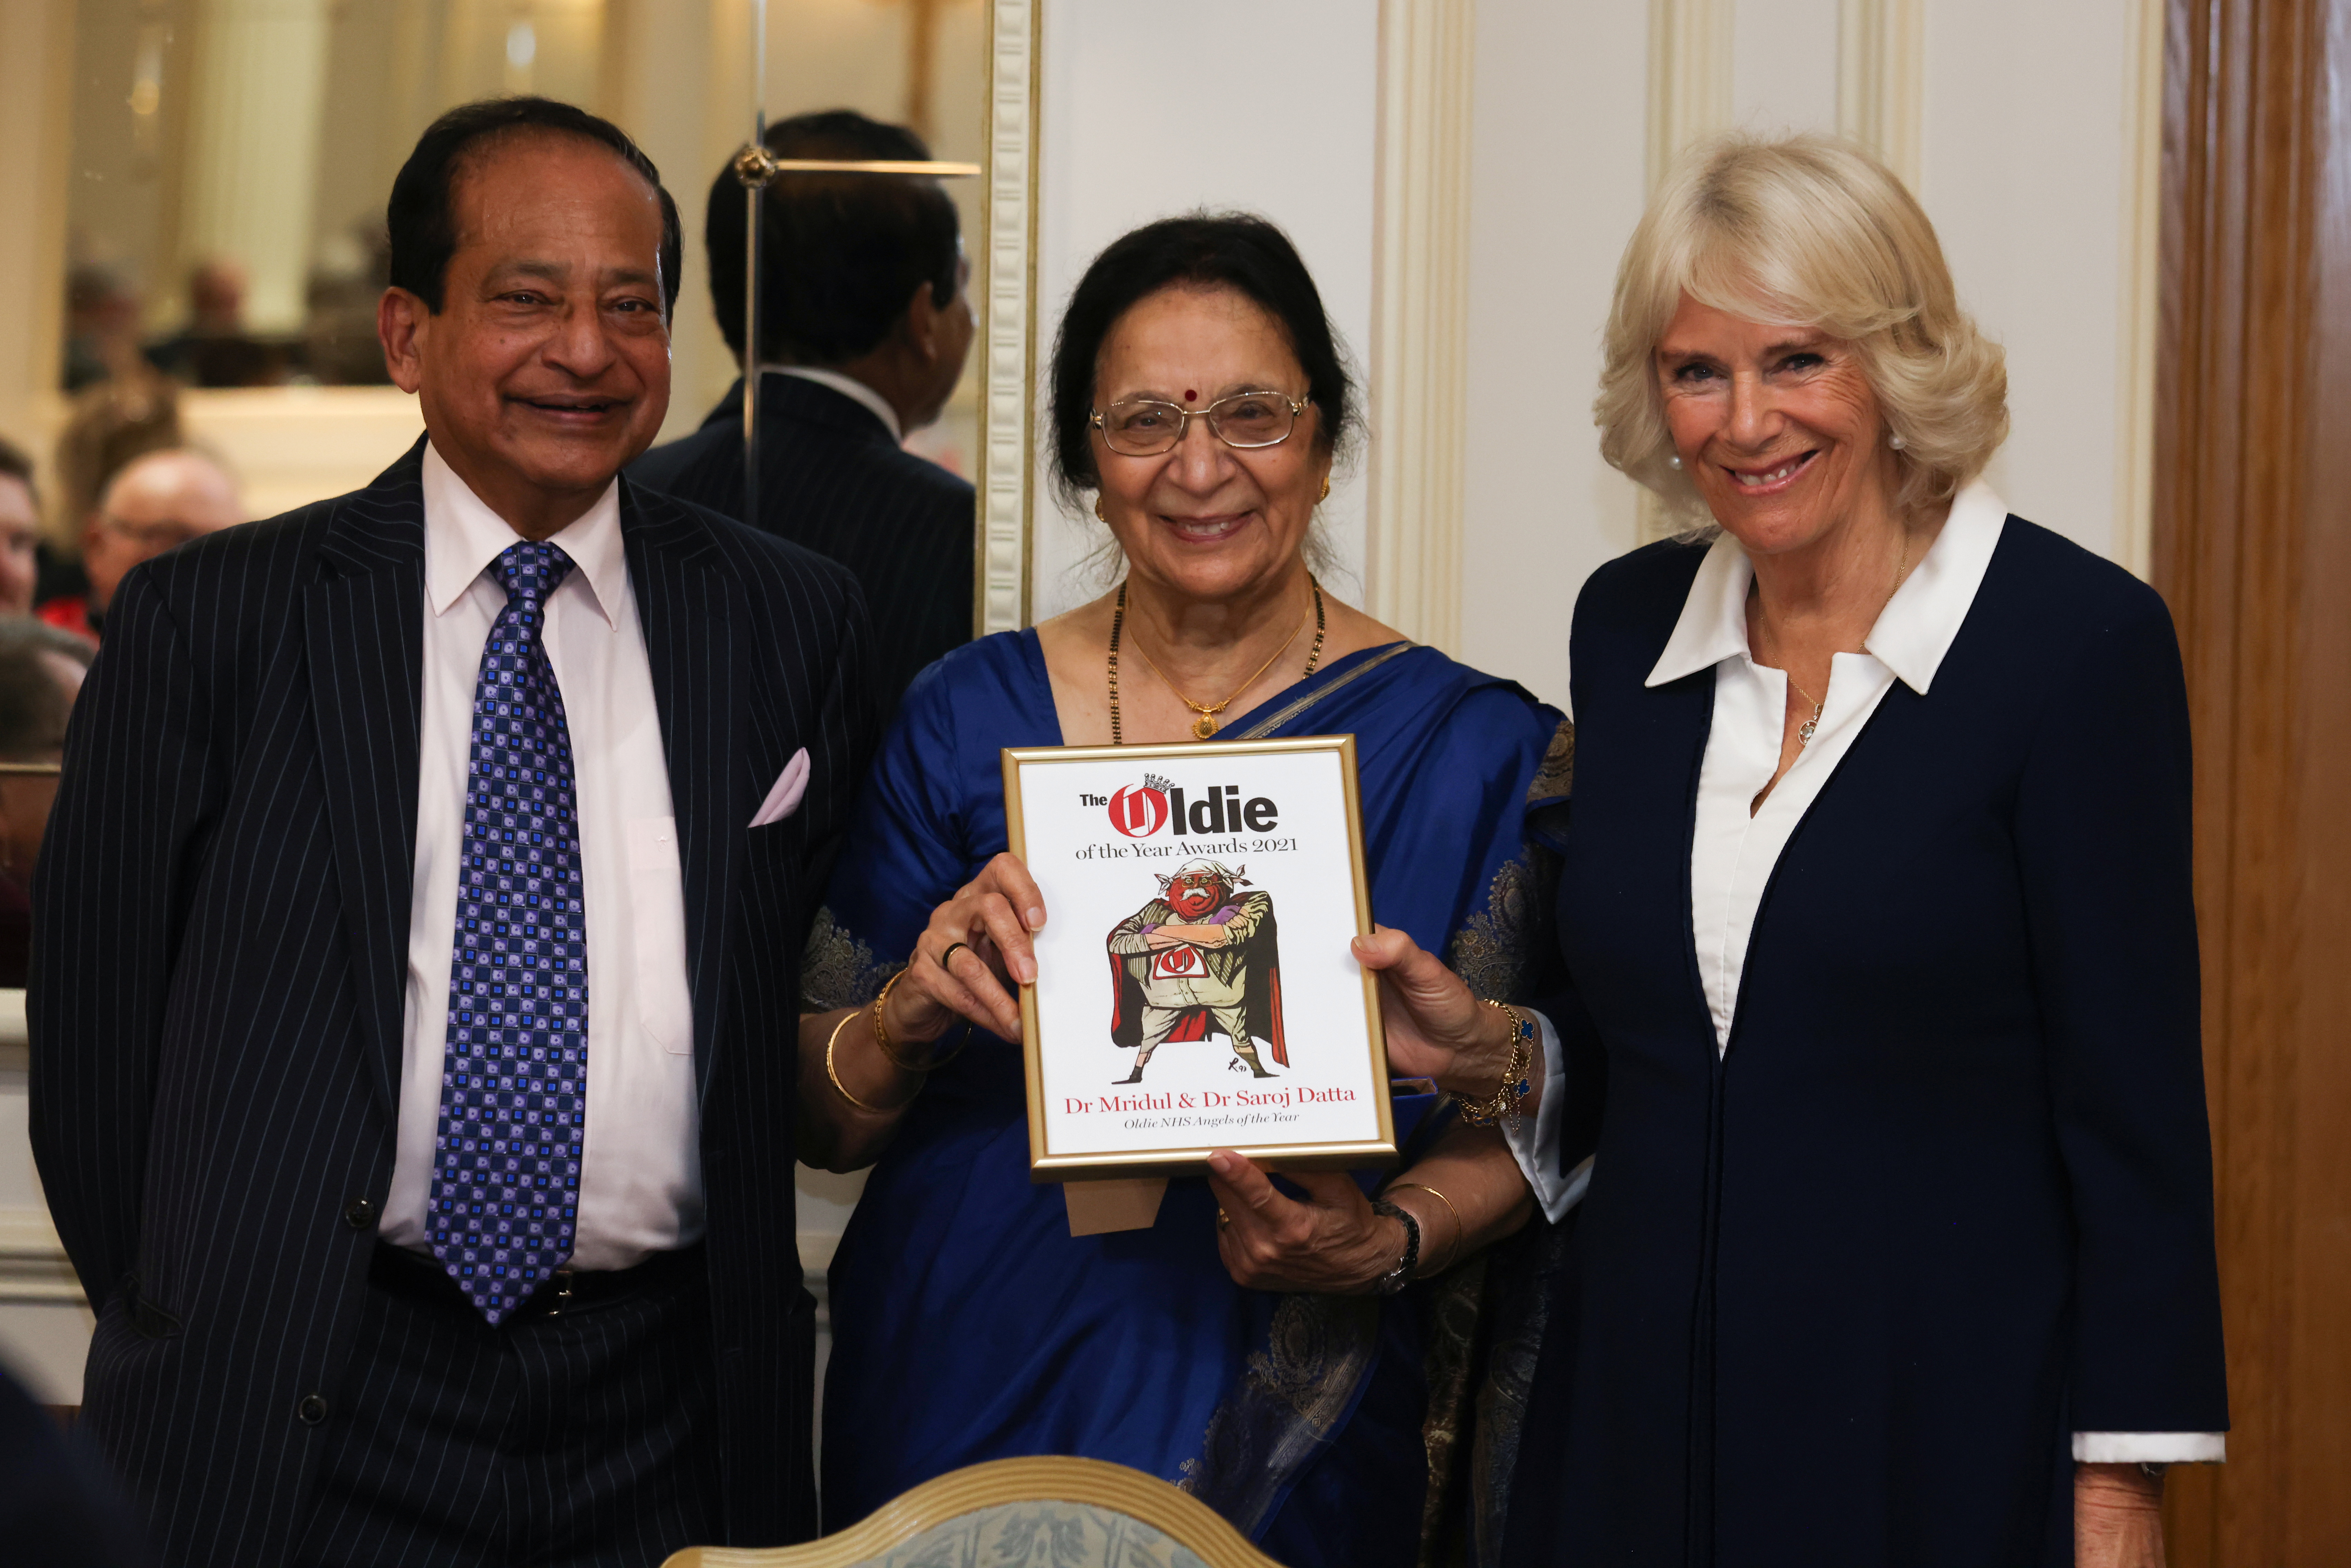 Britain's Camilla, Duchess of Cornwall, presents Dr Mridul Kumar and Dr Saroj Datta with the joint Oldie NHS Angels of the Year award during the Oldie Of The Year Awards 2021 at The Savoy Hotel in London, Britain, October 19, 2021. Chris Jackson/Pool via REUTERS